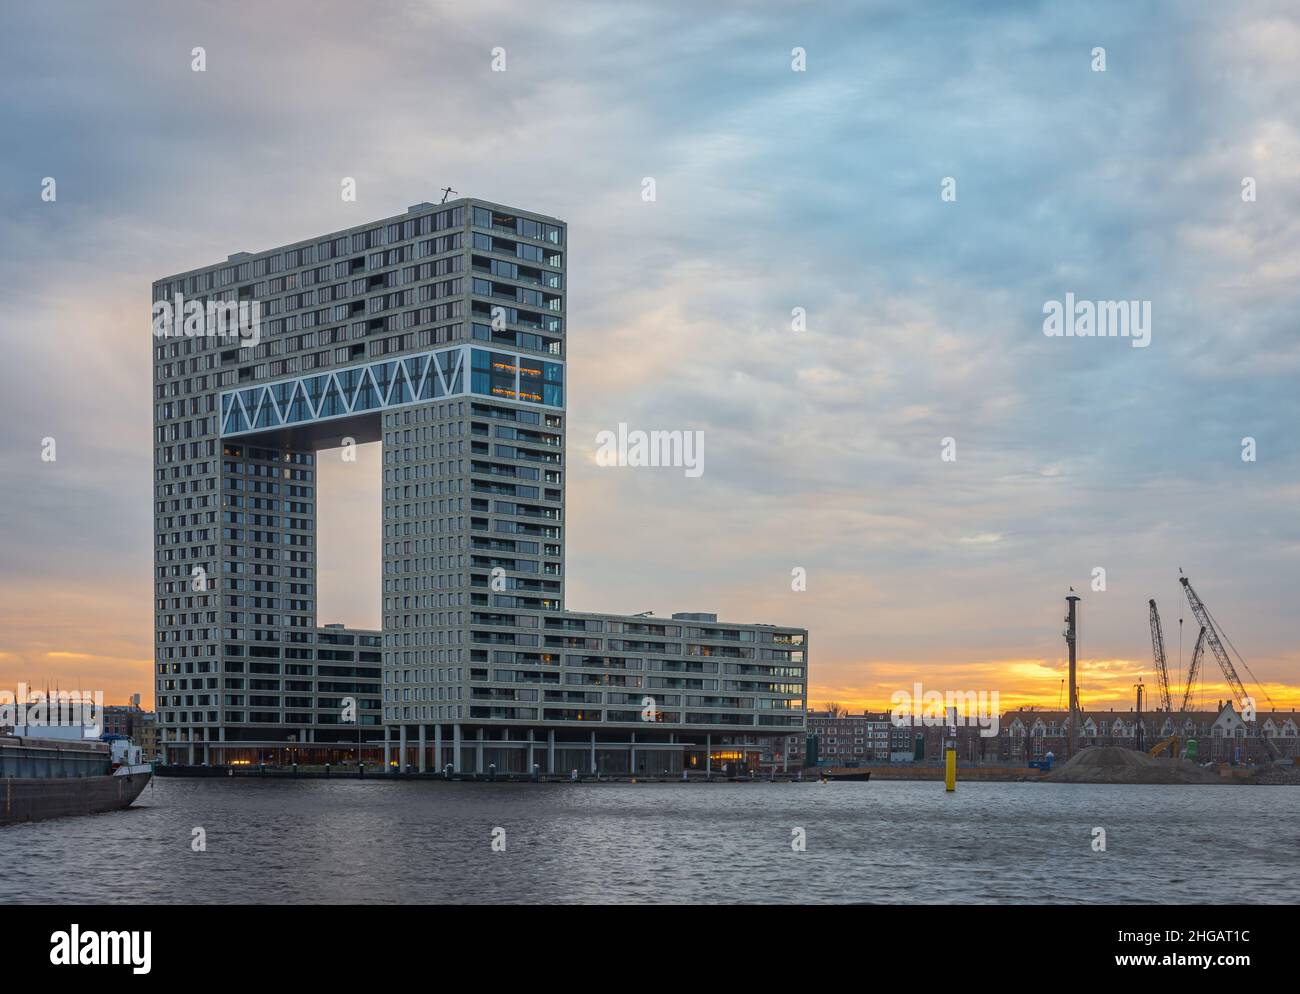 Amsterdam, North Holland, The Netherlands, 01.01.2022, Iconic residential tower known locally as Pontsteiger in Houthaven neighbourhood of Amsterdam Stock Photo